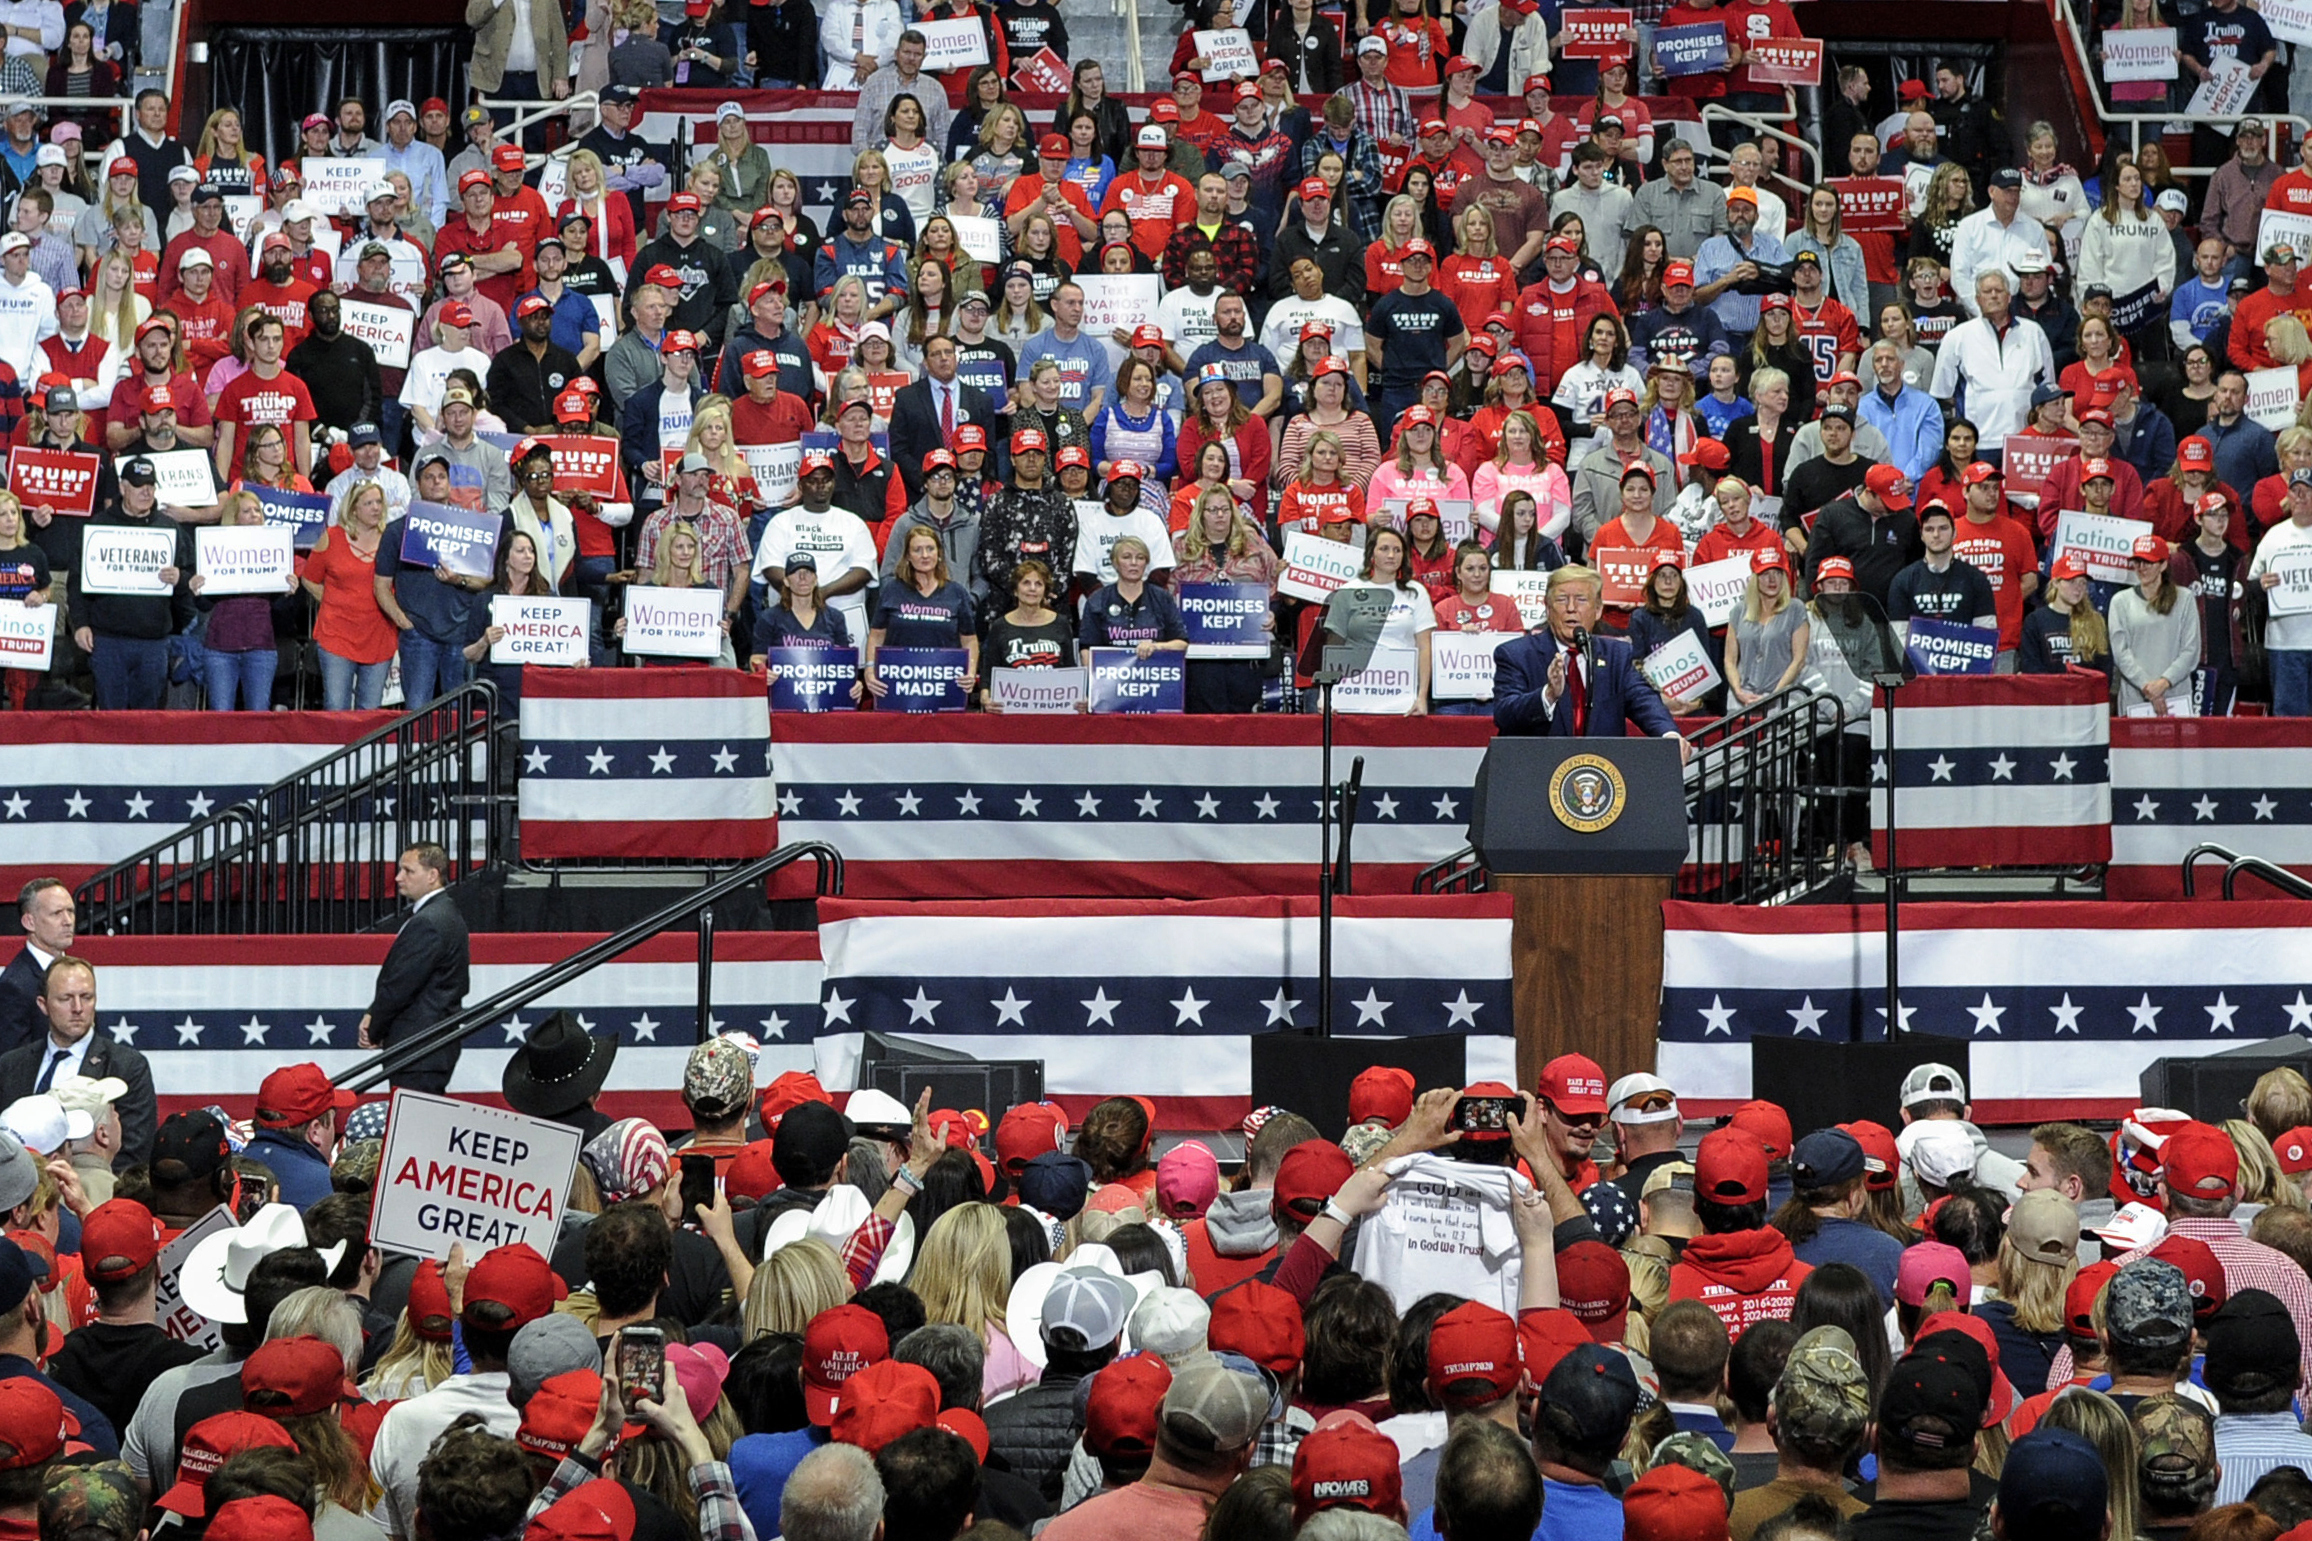 FILE - In this March 2, 2020 file photo, President Donald Trump speaks during a campaign rally in Charlotte, N.C. Trumpu2019s re-election campaign is planning a large indoor rally next week raising concern among health experts about how it might spread the coronavirus. Oklahoma health authorities say anyone who attends a large public event should get tested for COVID-19 shortly after. Photo: AP